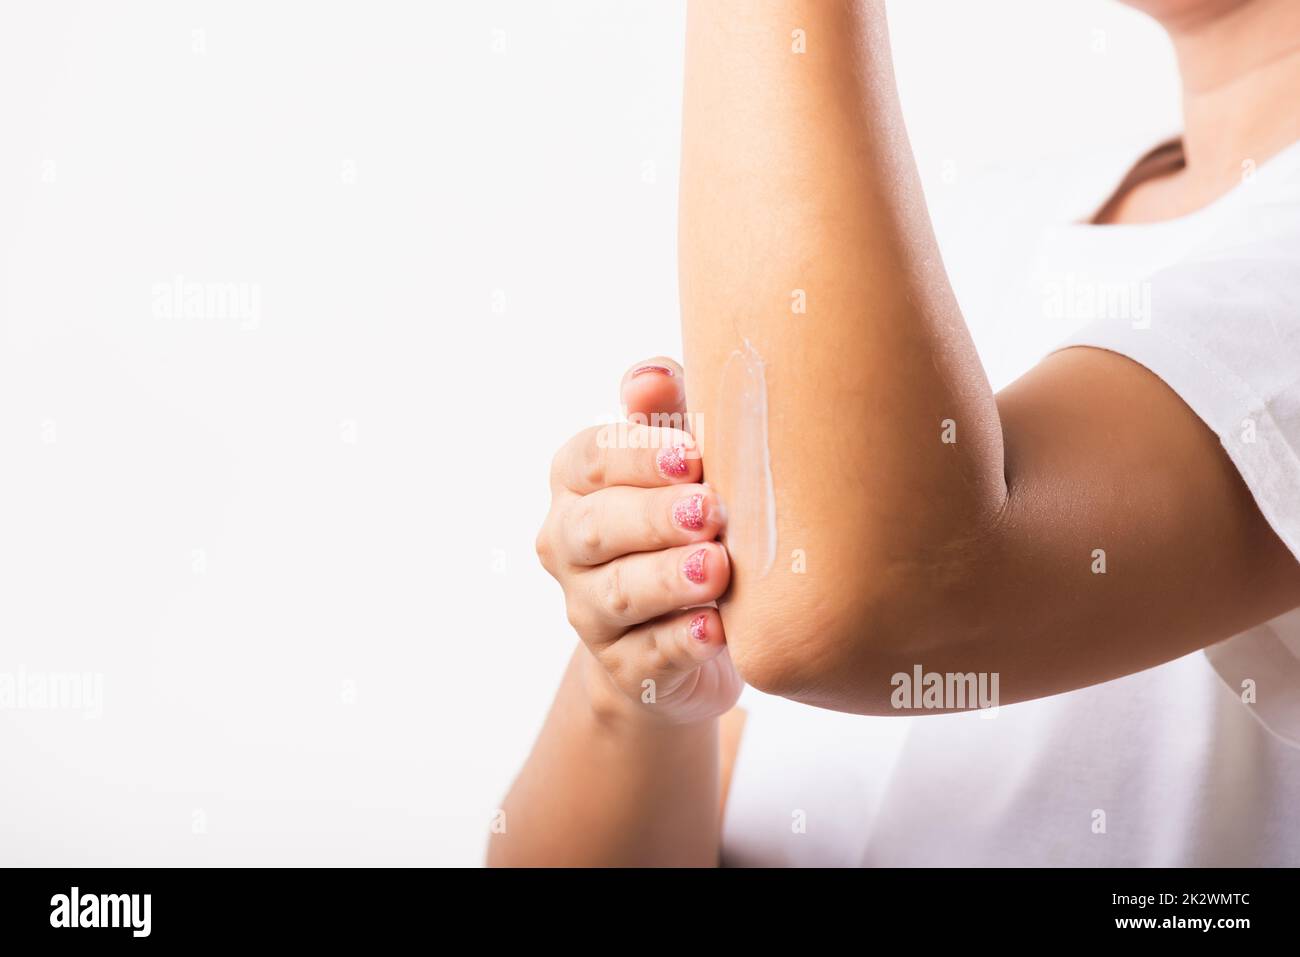 Woman applies lotion cream on her elbow Stock Photo